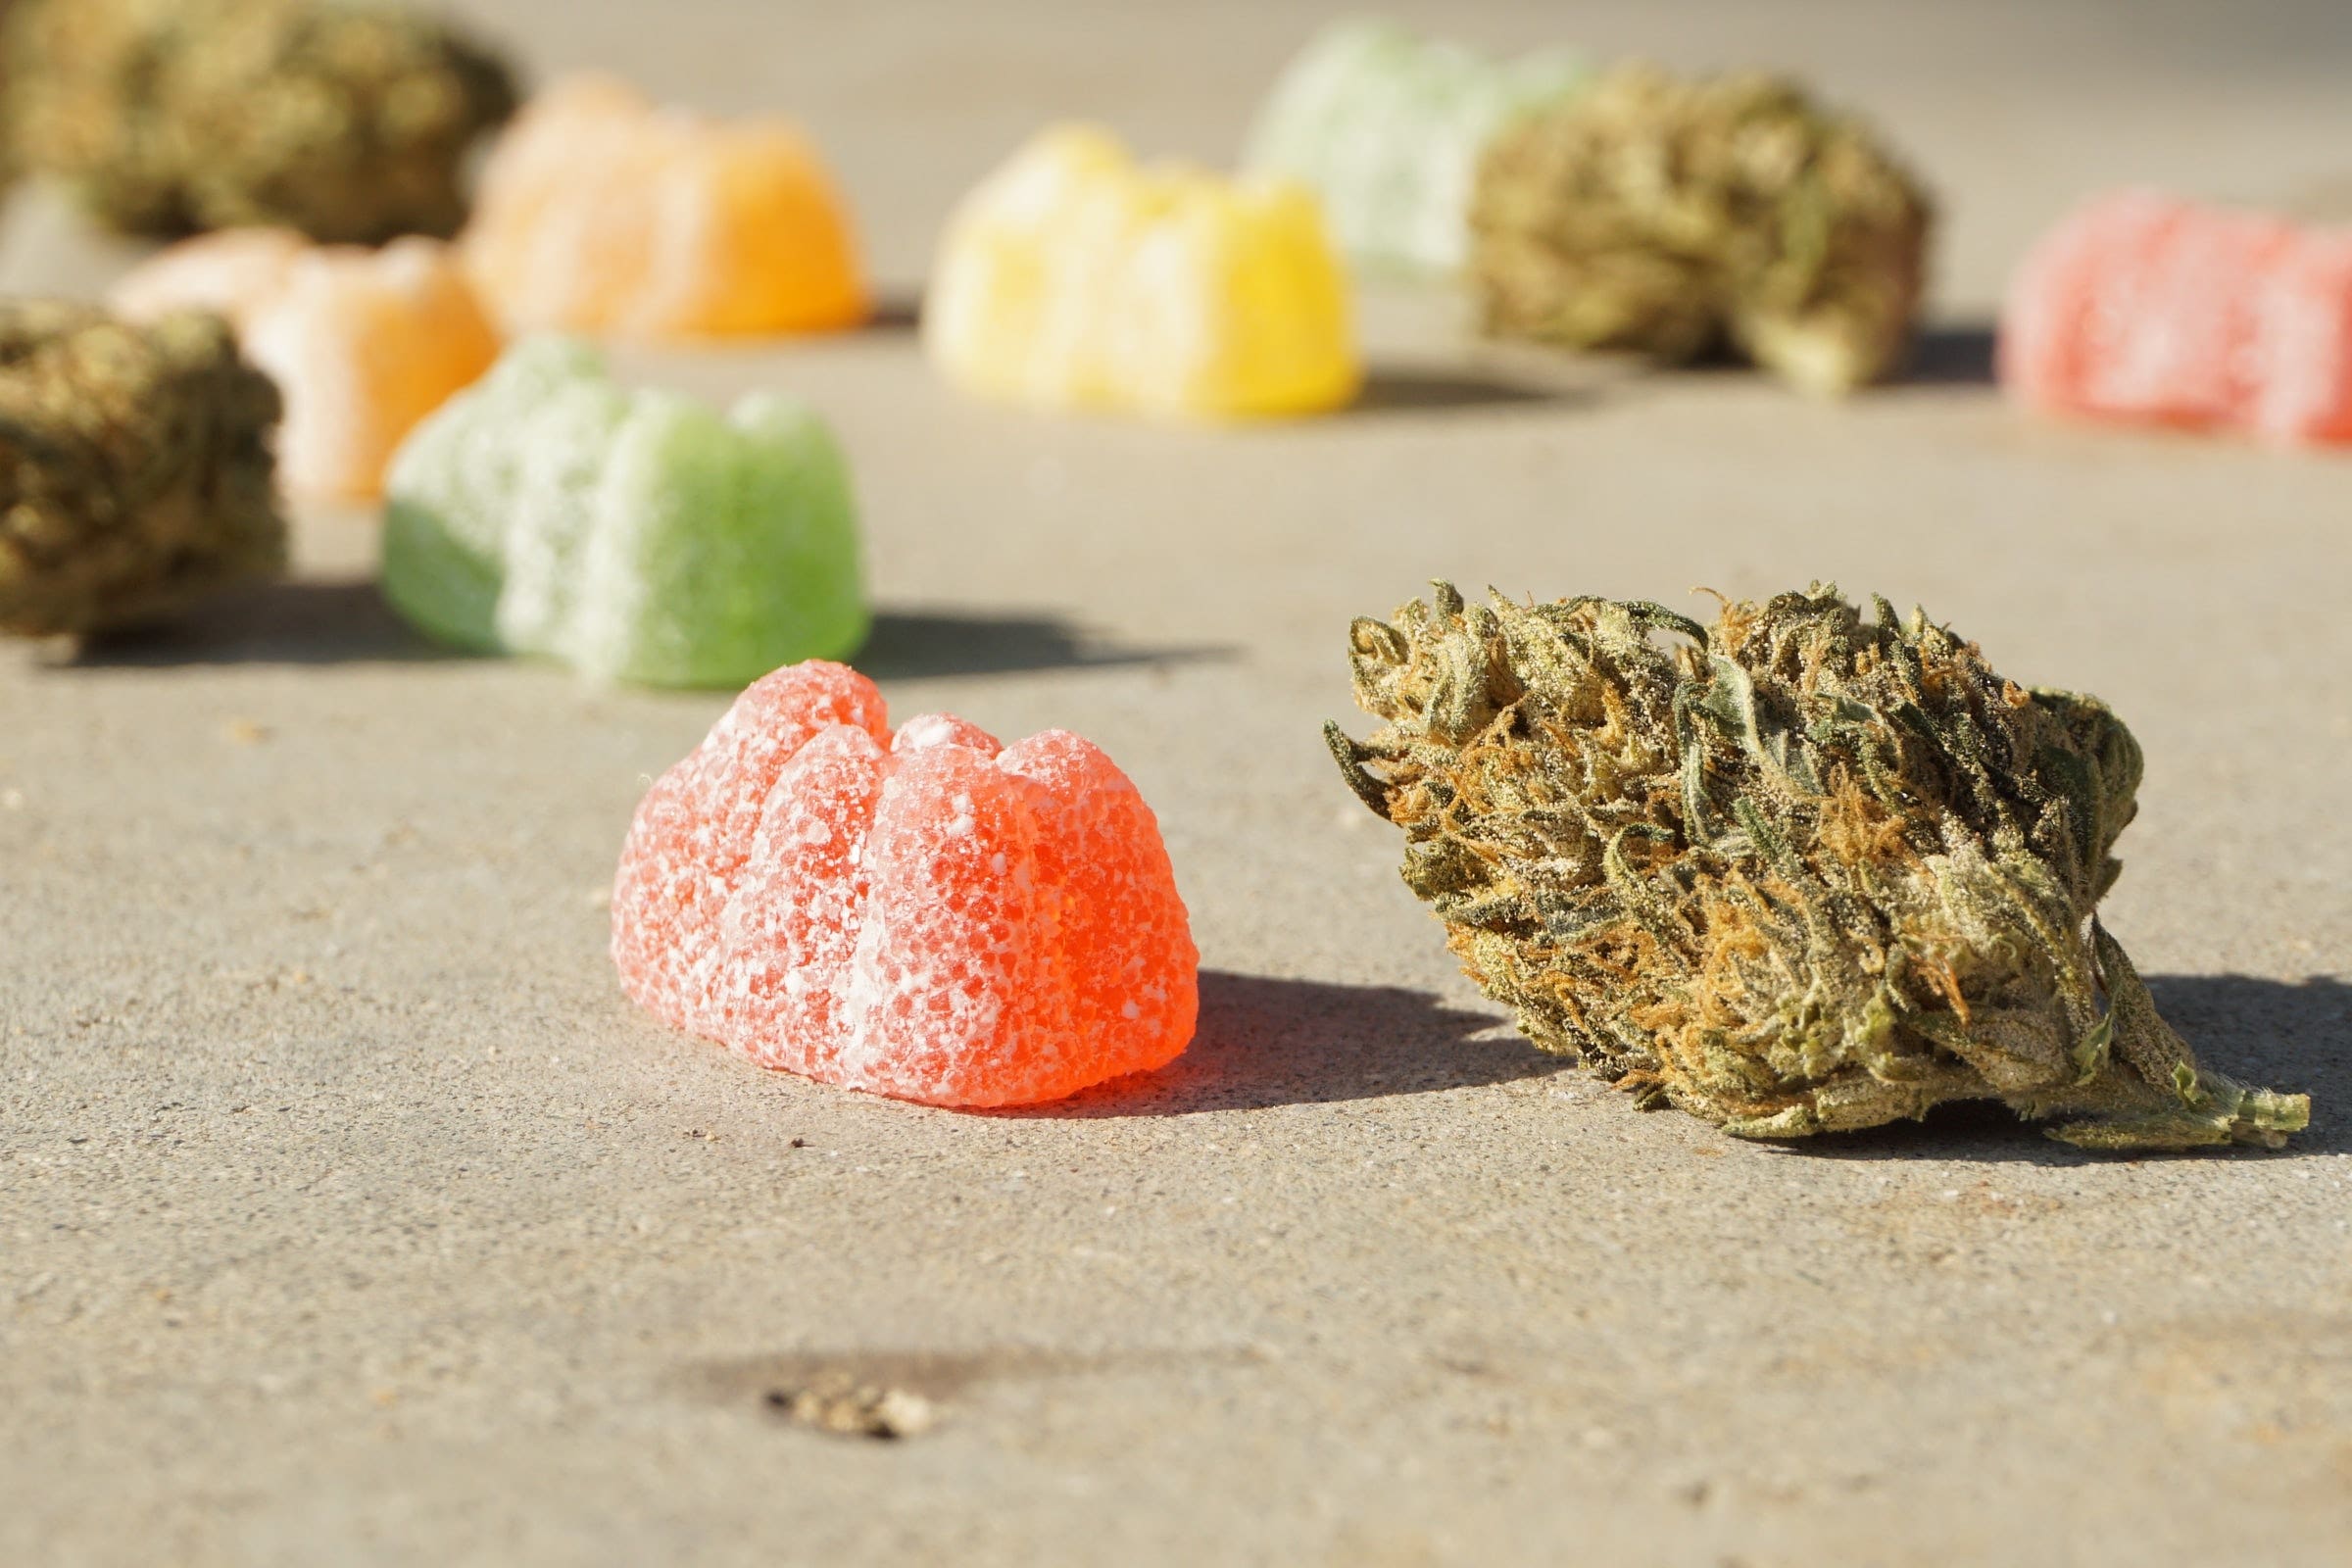 Minnesotans Can Now Legally Buy THC Edibles, But Who Will Regulate Potency & Safety?